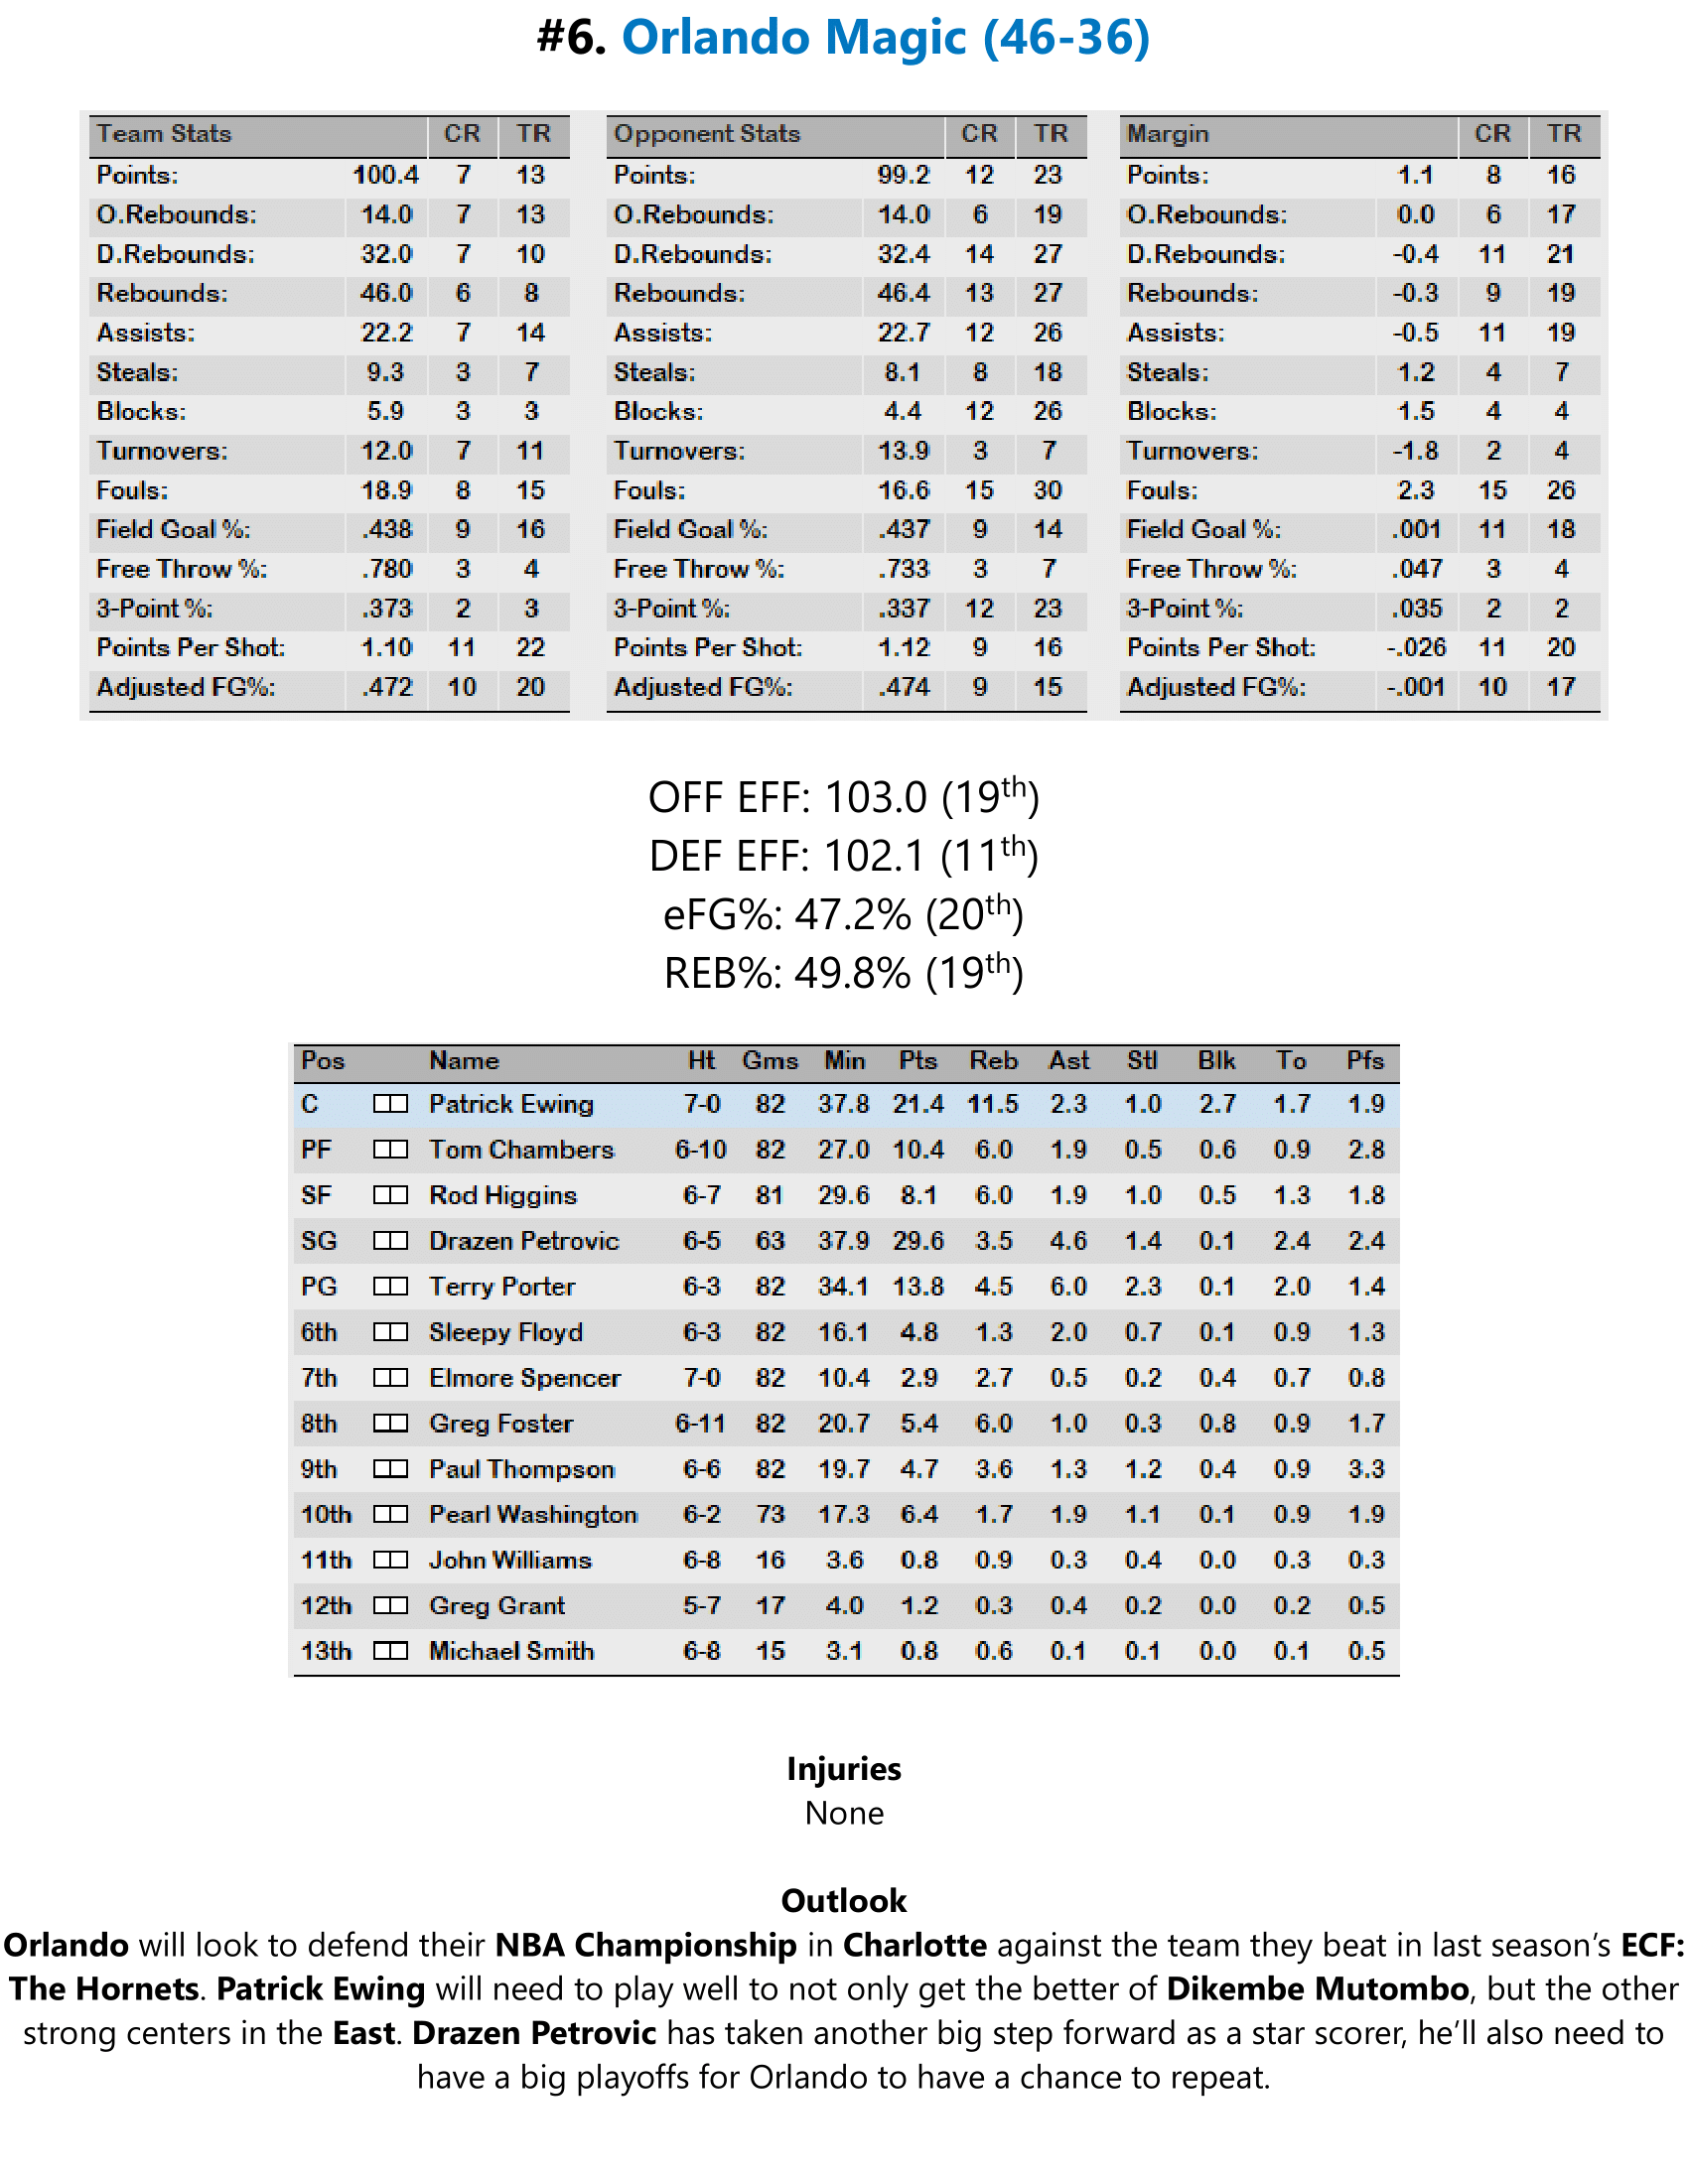 94-95-Part-3-Playoff-Preview-15.png